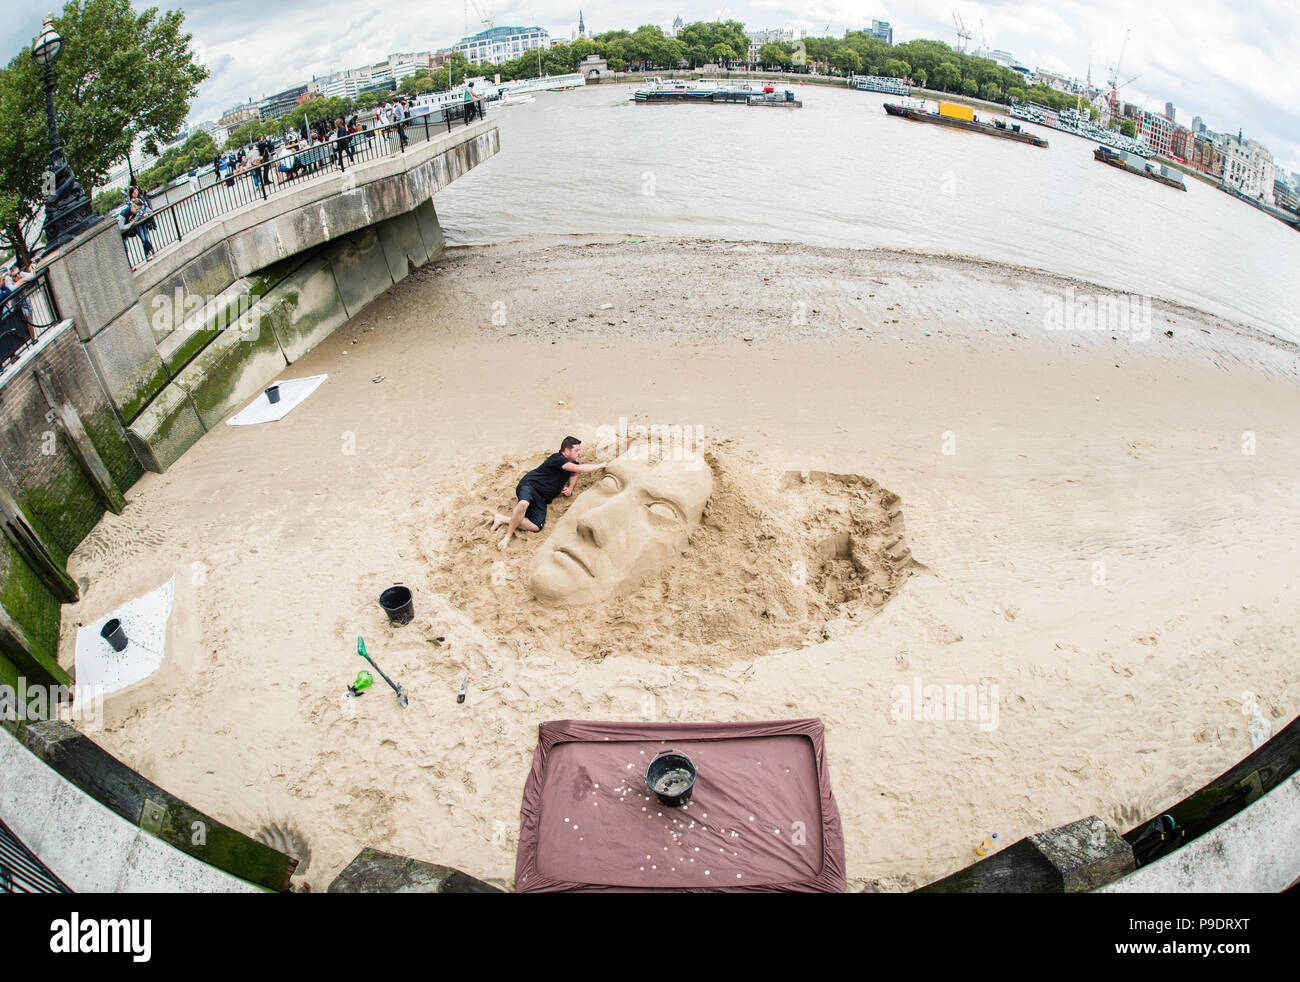 Street photography image of a male artist doing a sand sculpture on the banks of the River Thames in London Stock Photo